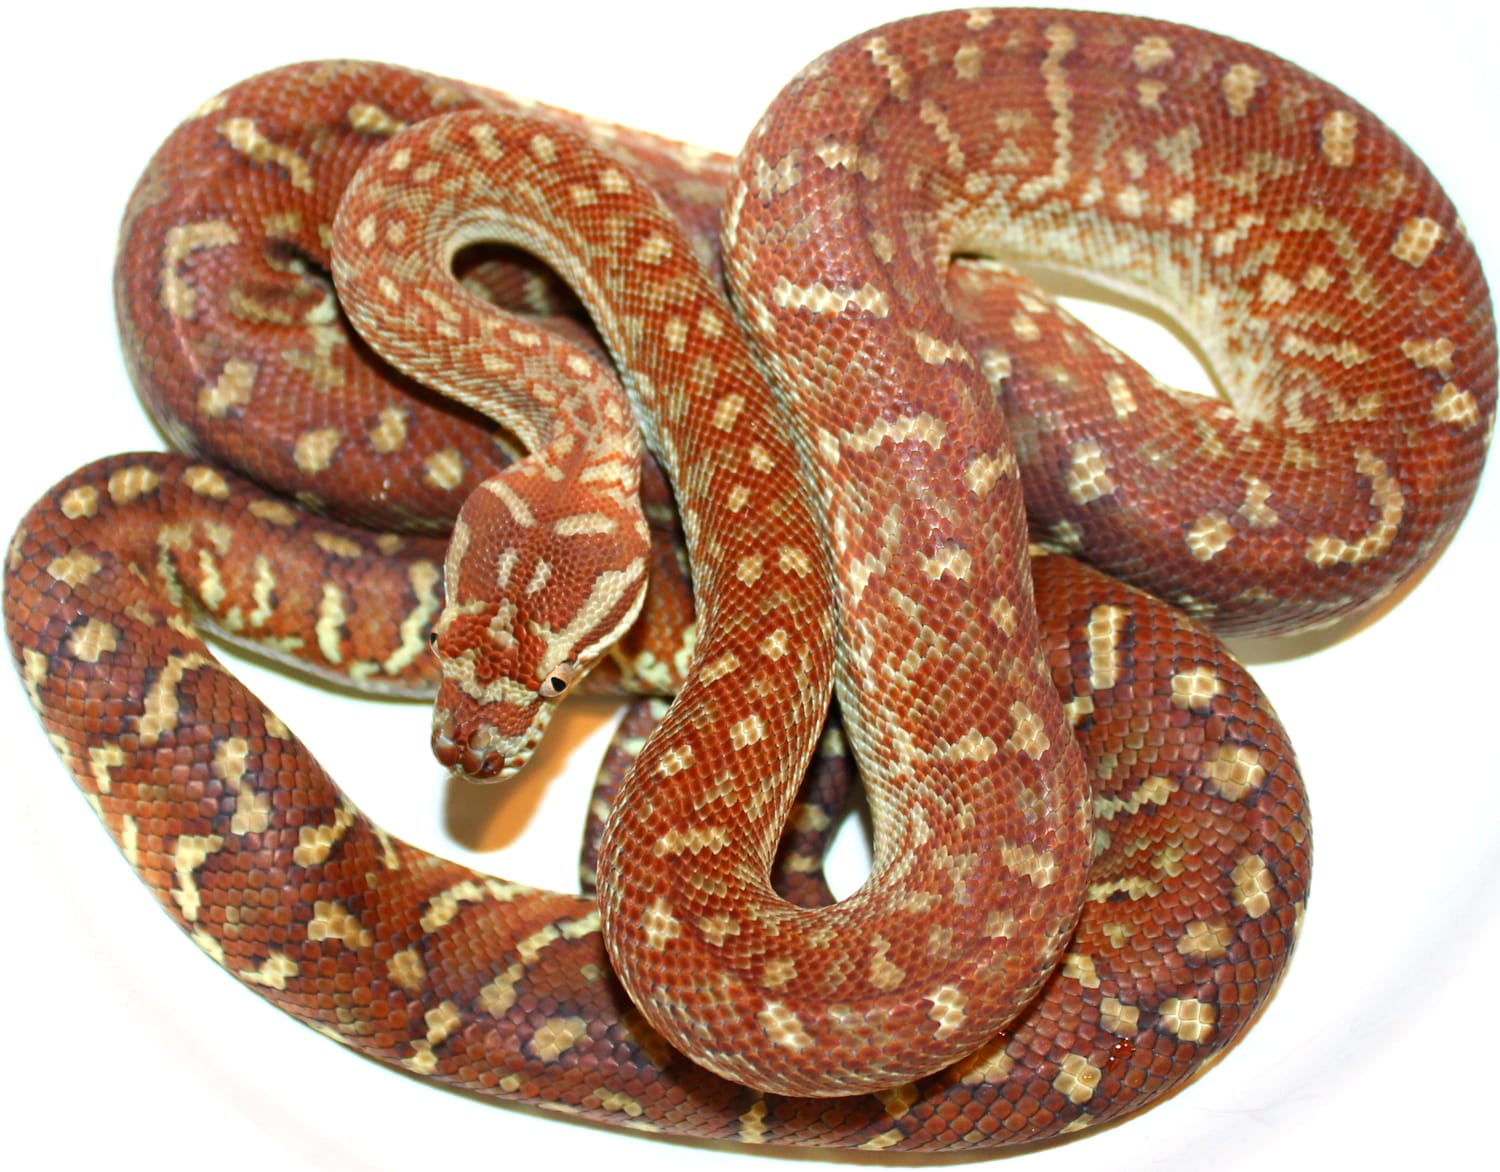 Hypomelanistic Stonewashed Centralian Carpet Python by Inland Reptile